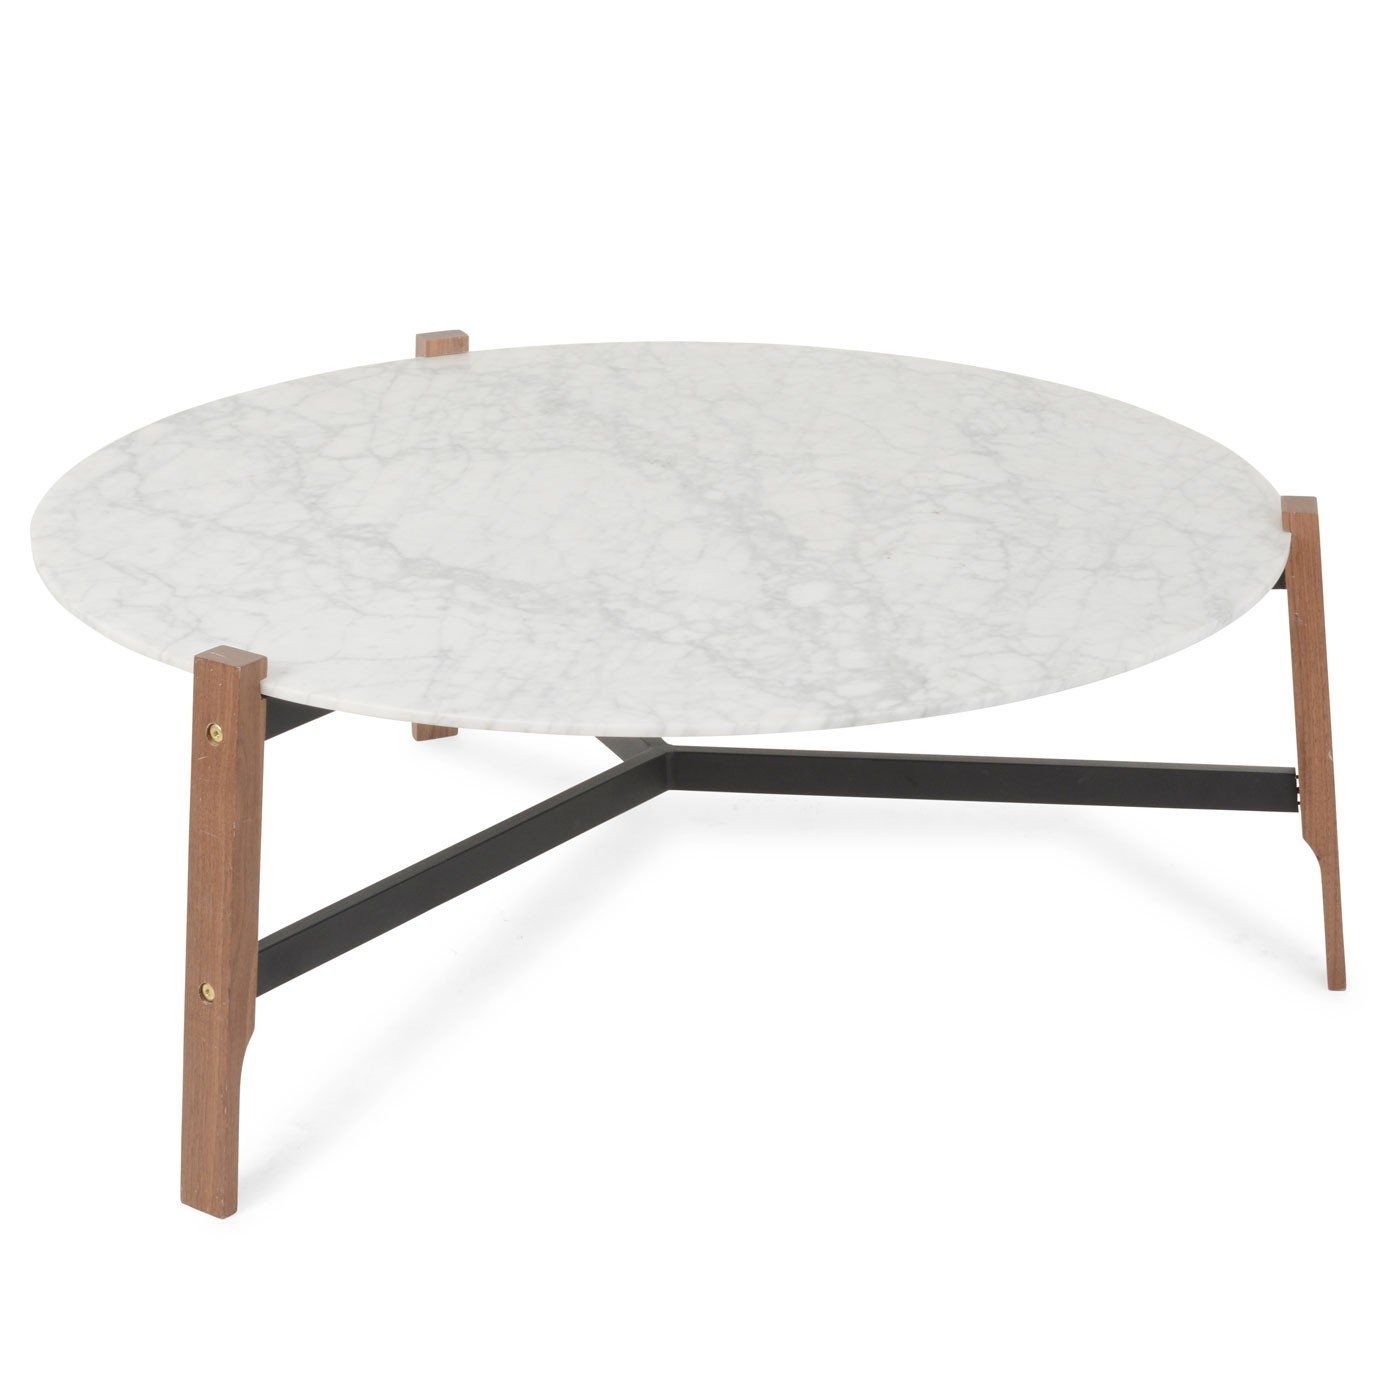 Blu Dot Free Range Coffee Table In Marble | Heal's Throughout Suspend Ii Marble And Wood Coffee Tables (View 12 of 30)